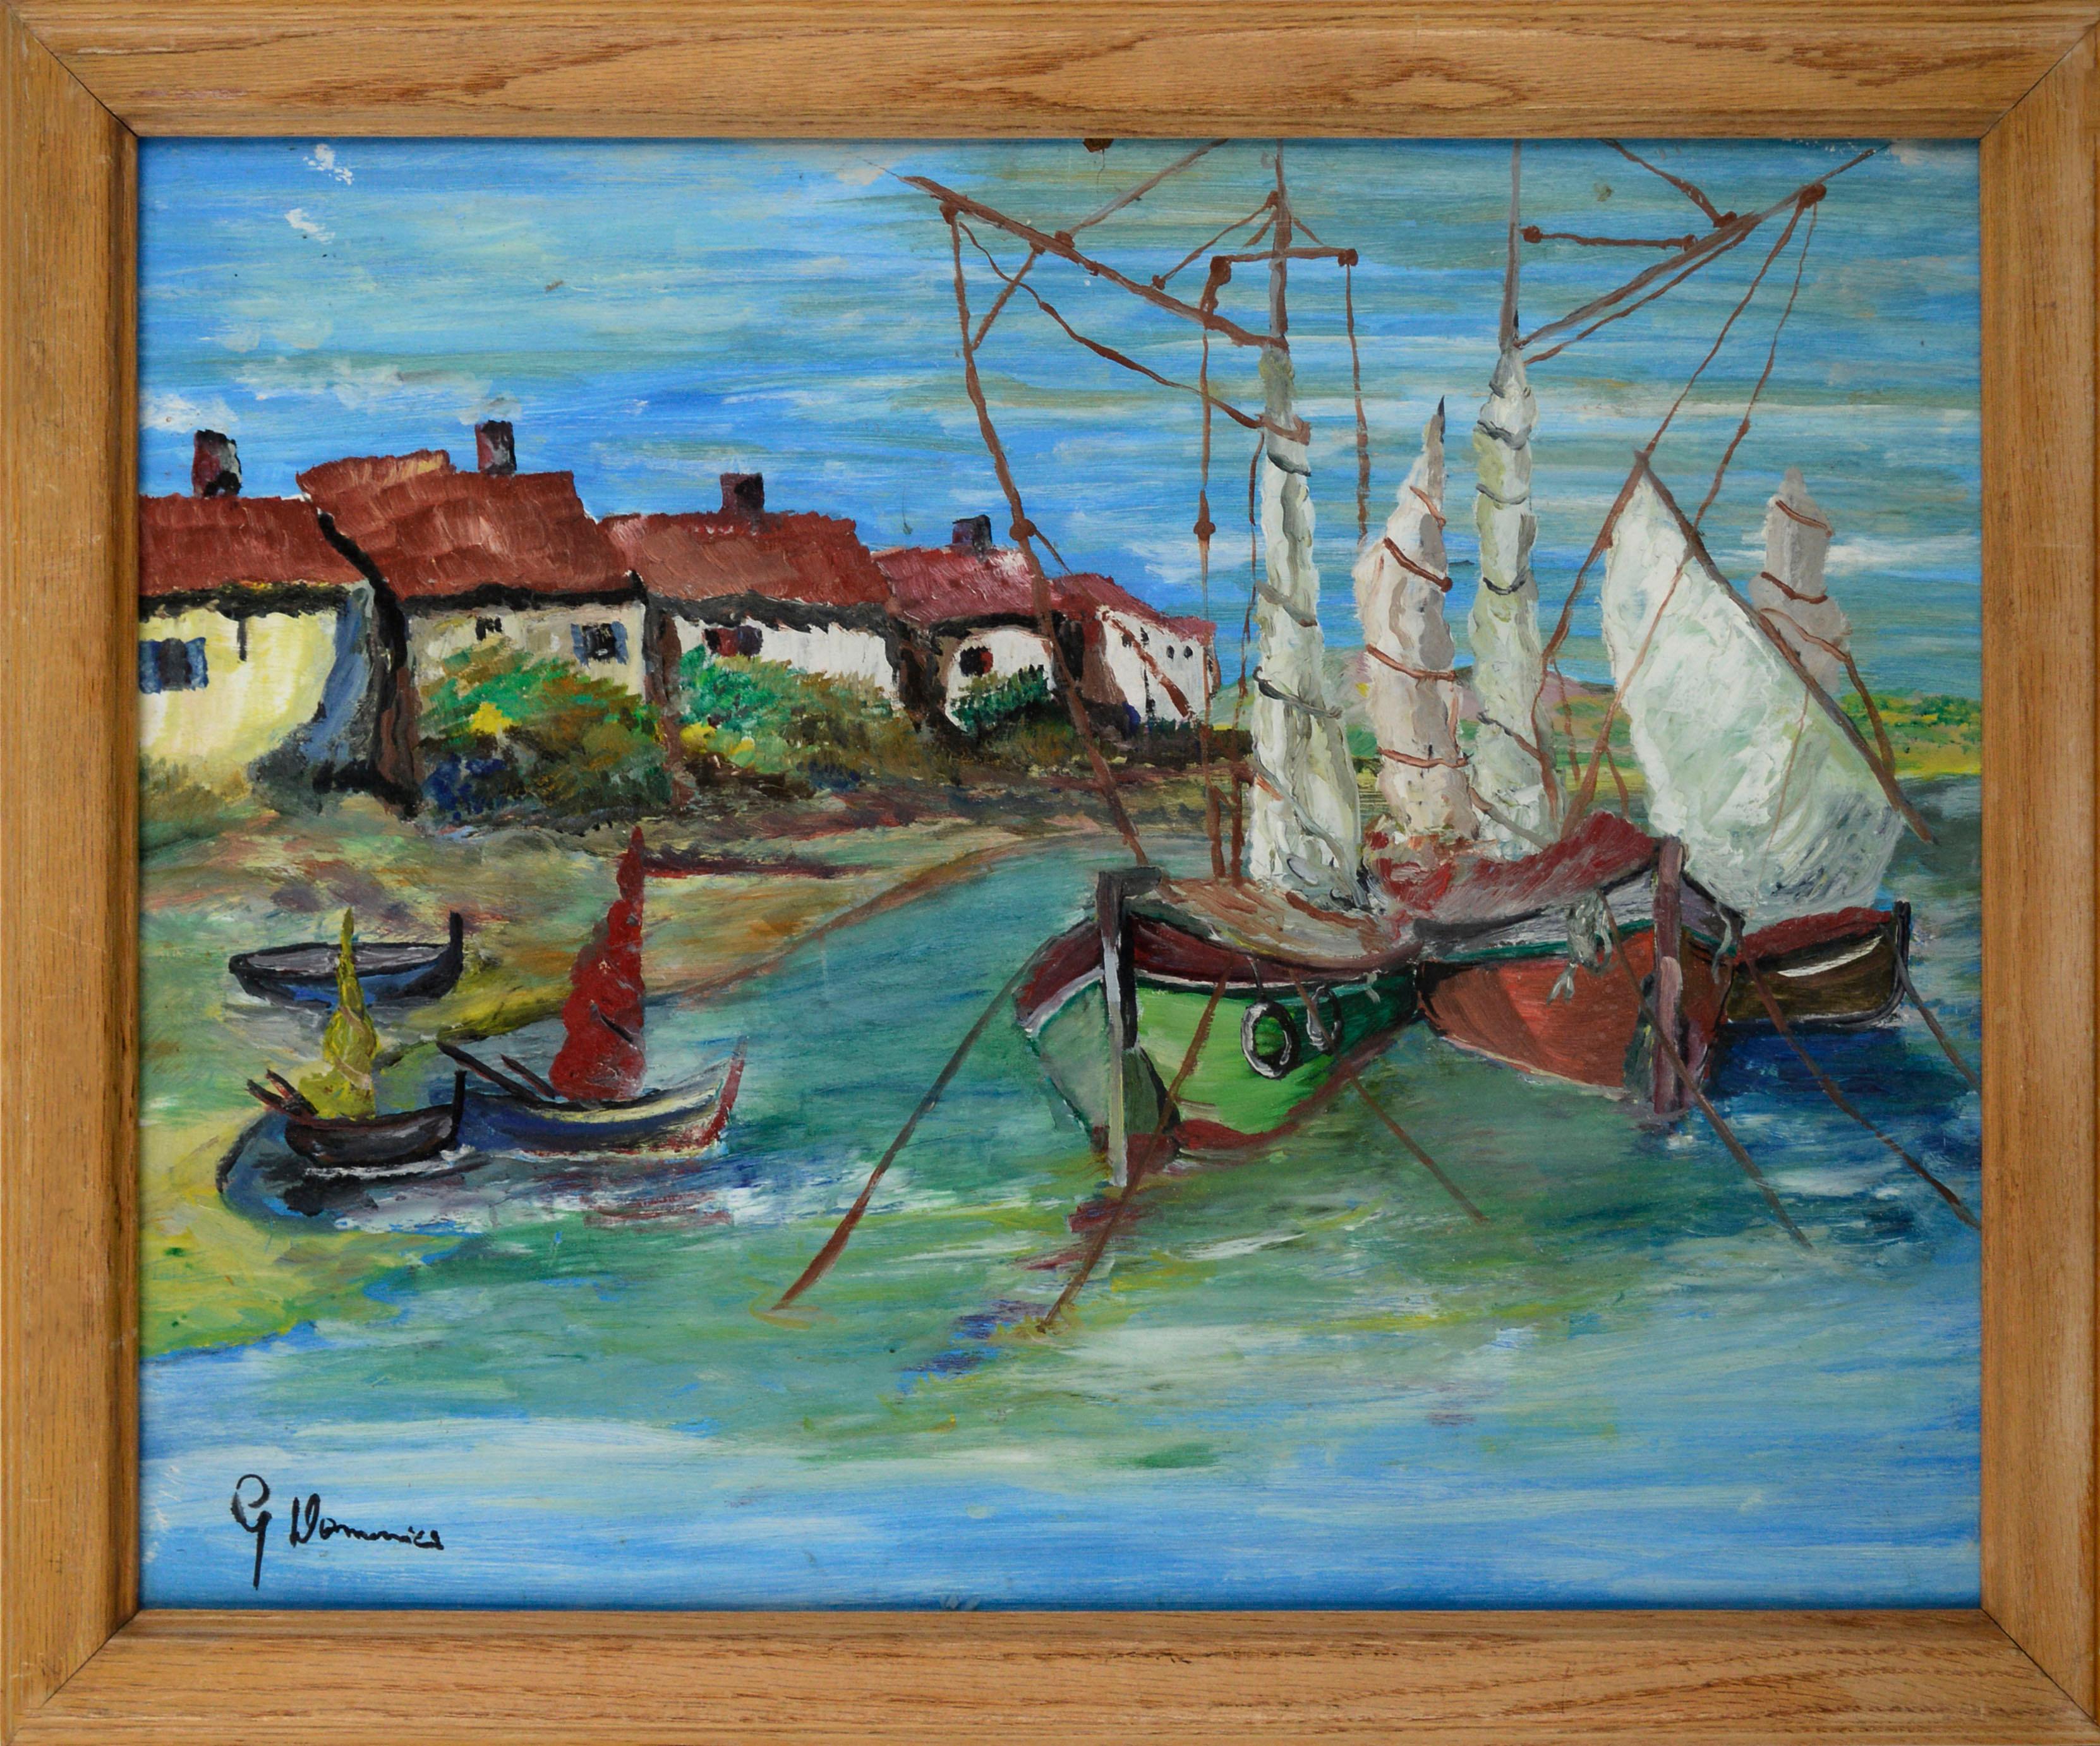 A one of a kind double-sided mid century maritime seascape in the style of and after. Beppe (Giuseppe) Domenici (Italian, 1924-2008). This reversible piece boasts two mid-century seascapes with boats, one on each side. The featured seascape on the